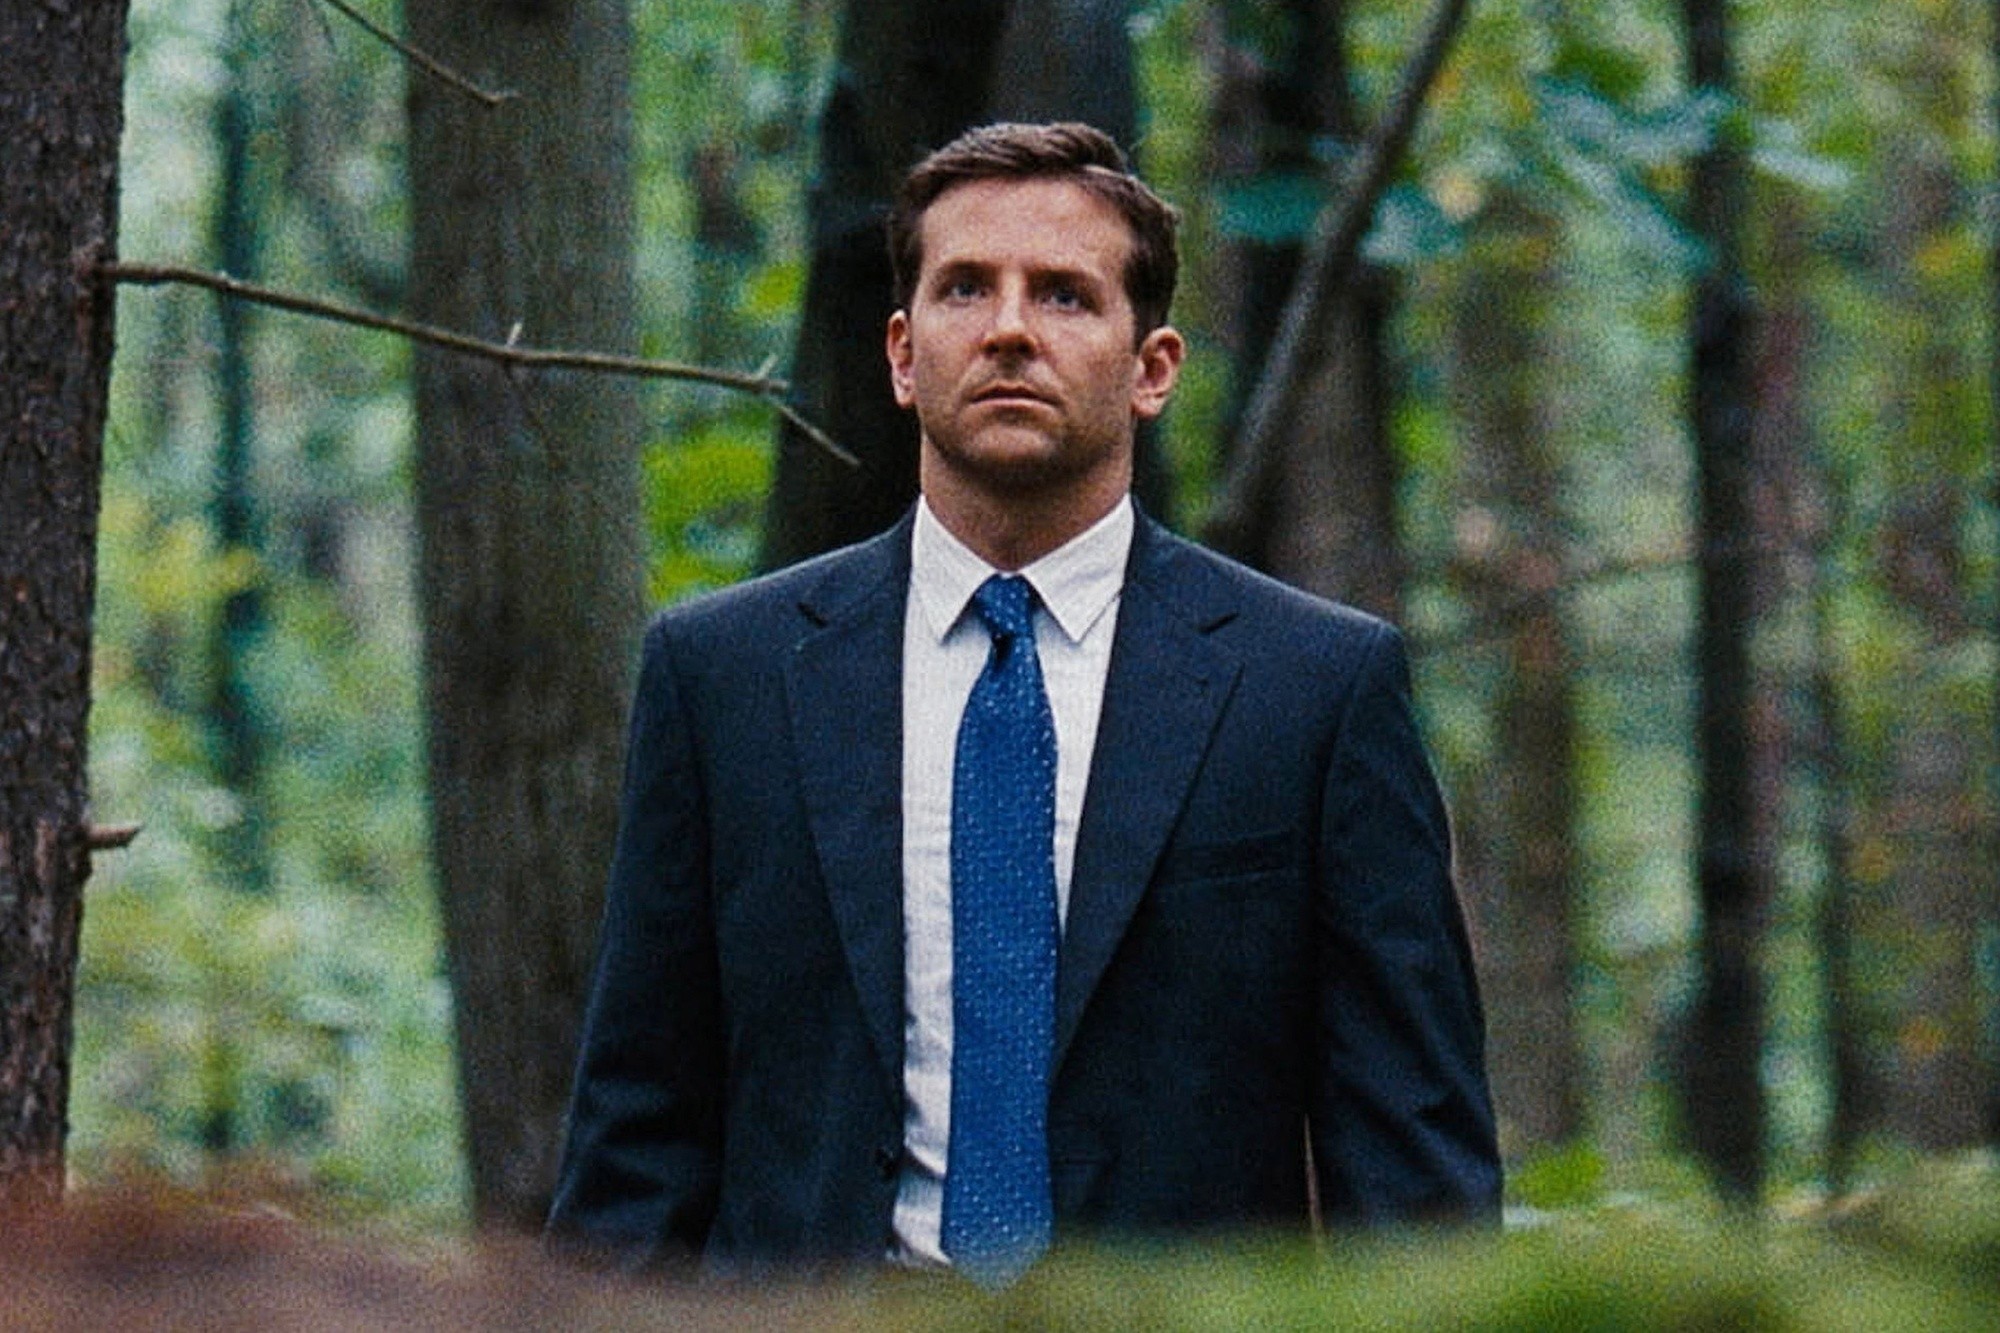 Bradley Cooper stars as Avery Cross in Focus Features' The Place Beyond the Pines (2013). Photo credit by Atsushi Nishijima.